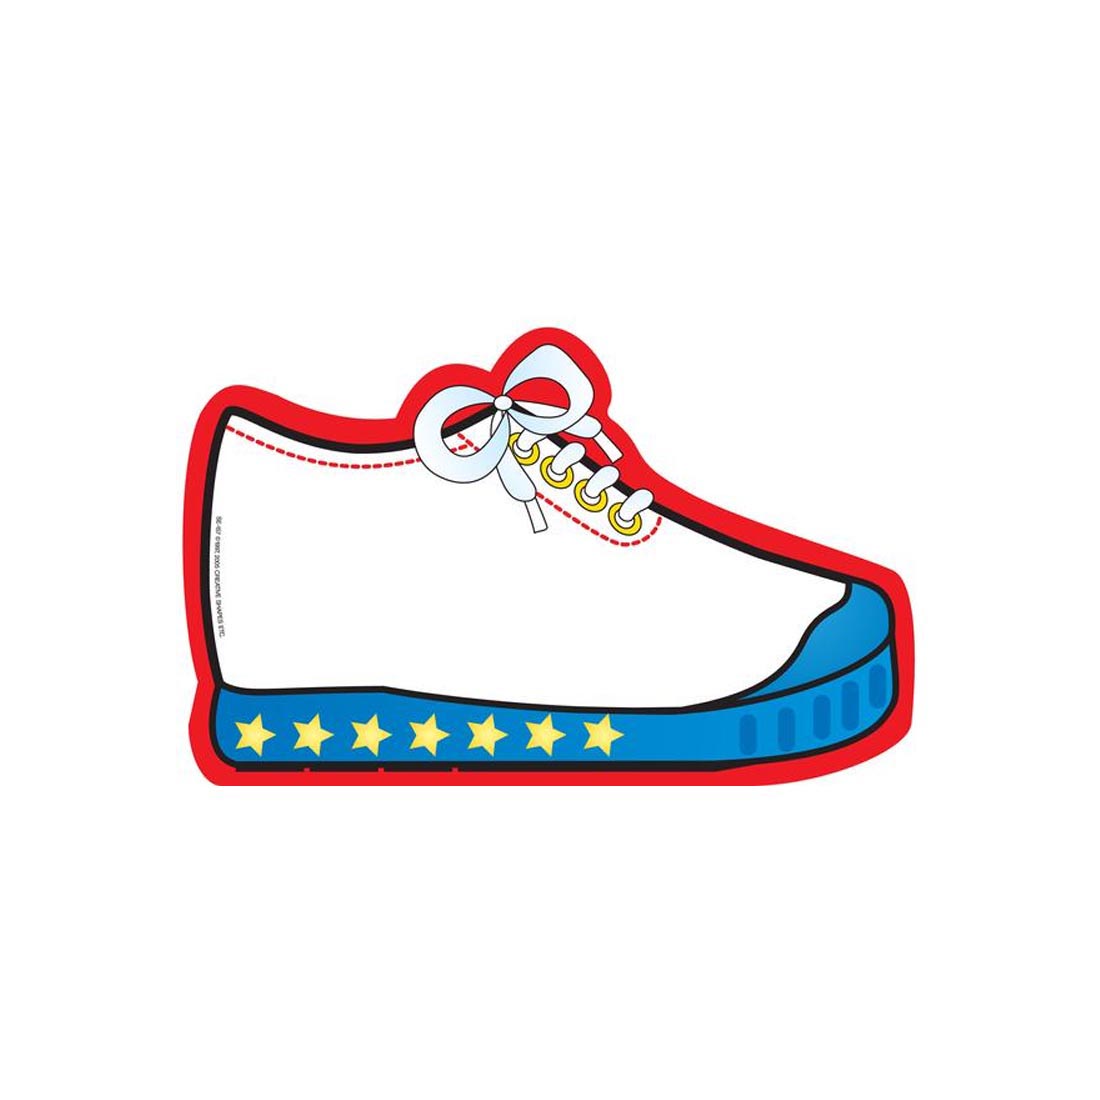 Sneaker Notepad by Creative Shapes